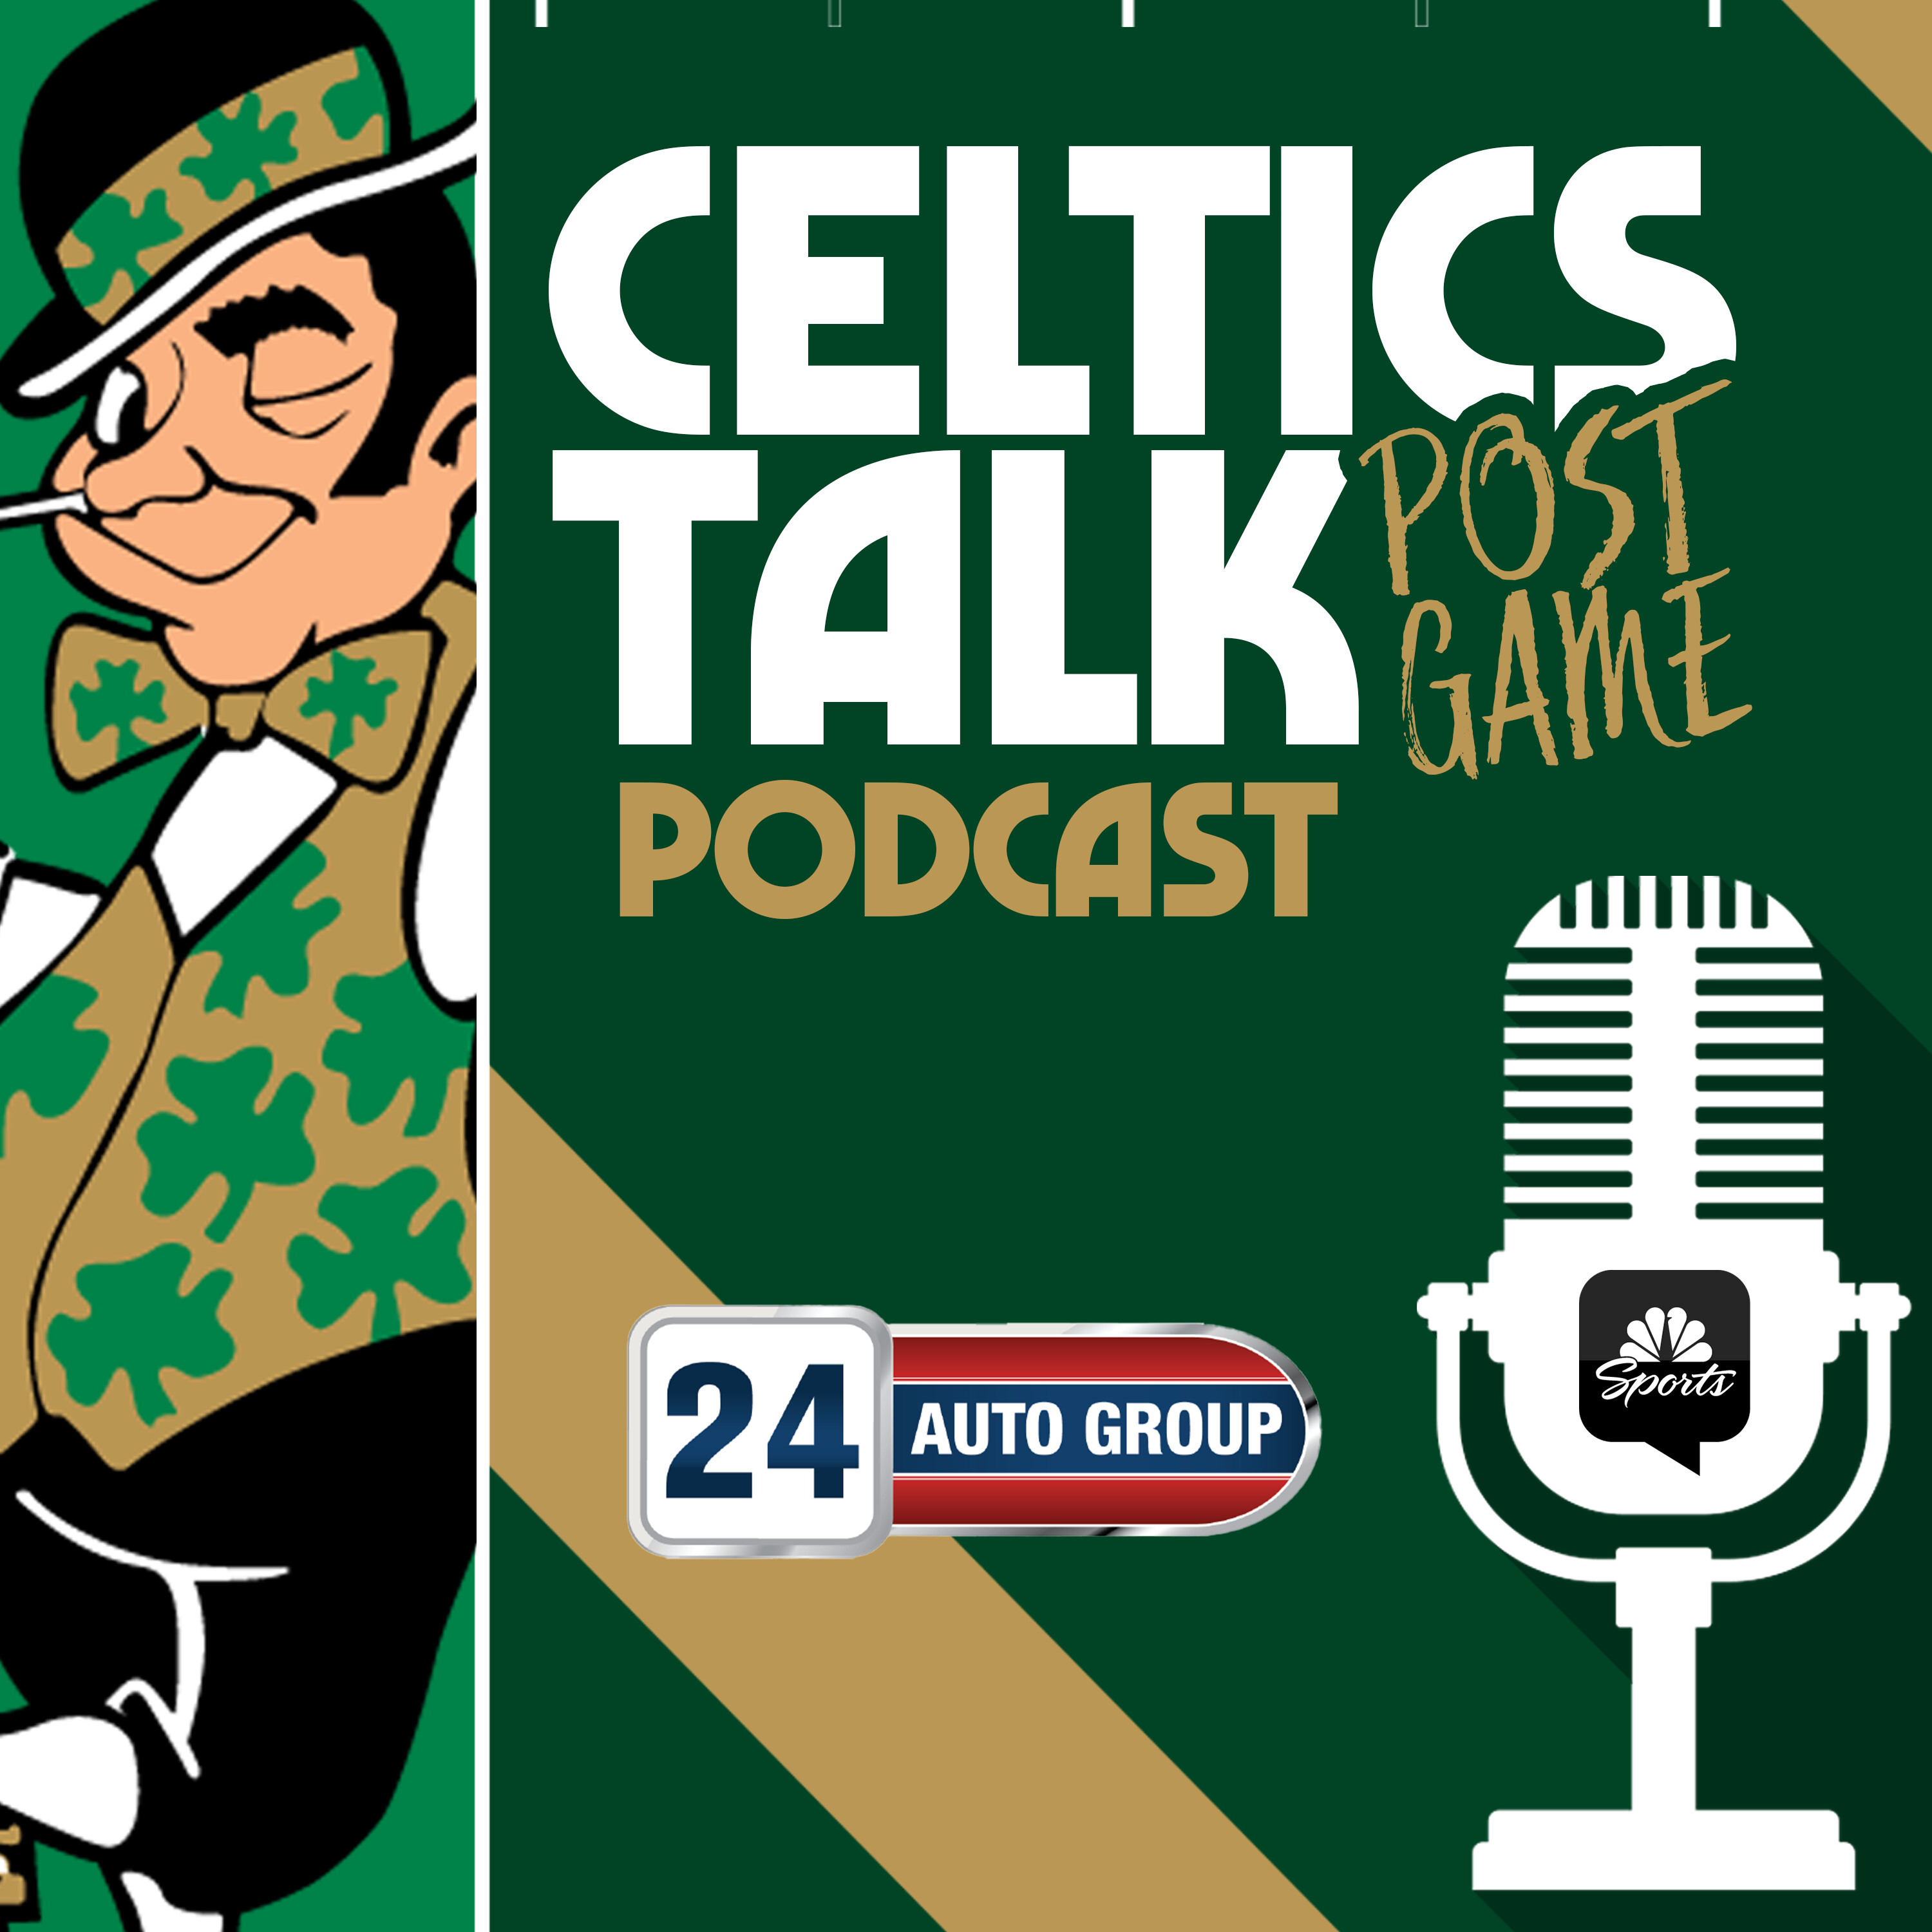 POSTGAME POD: Shorthanded Celtics beat 76ers in ”most satisfying win” of the season